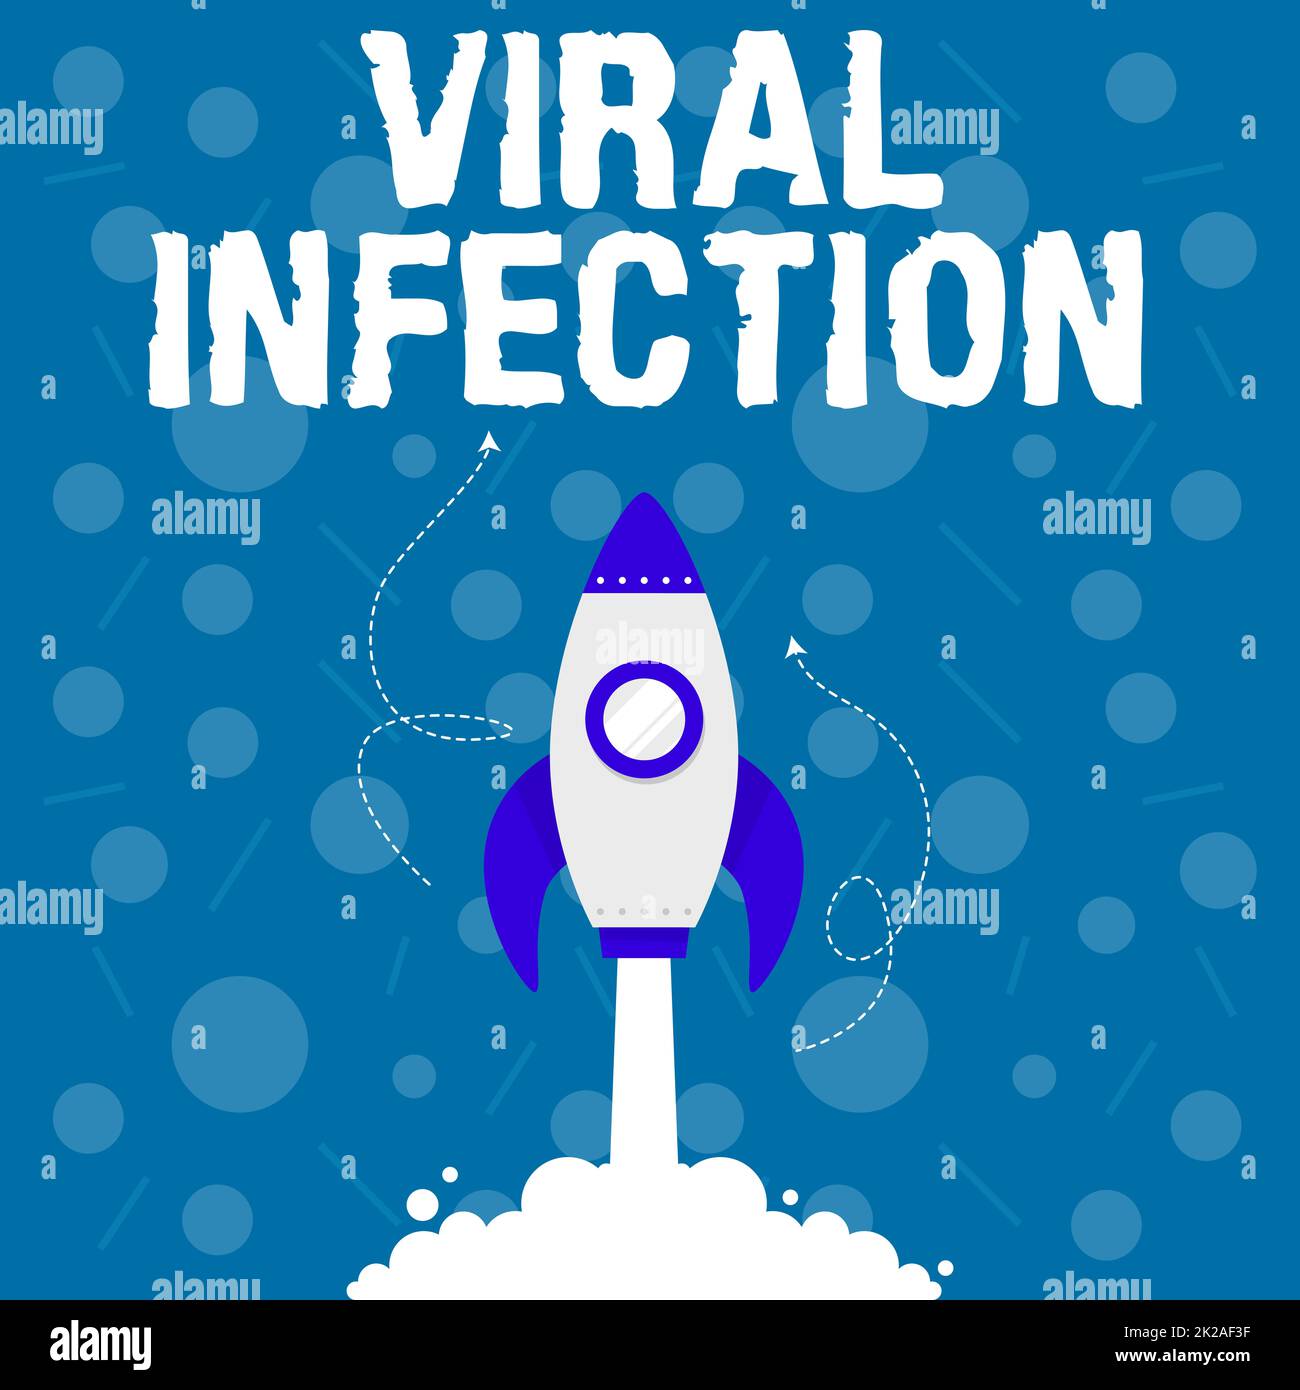 Text showing inspiration Viral Infection. Word for Viral Infection Illustration Of Rocket Ship Launching Fast Straight Up To The Outer Space. Stock Photo